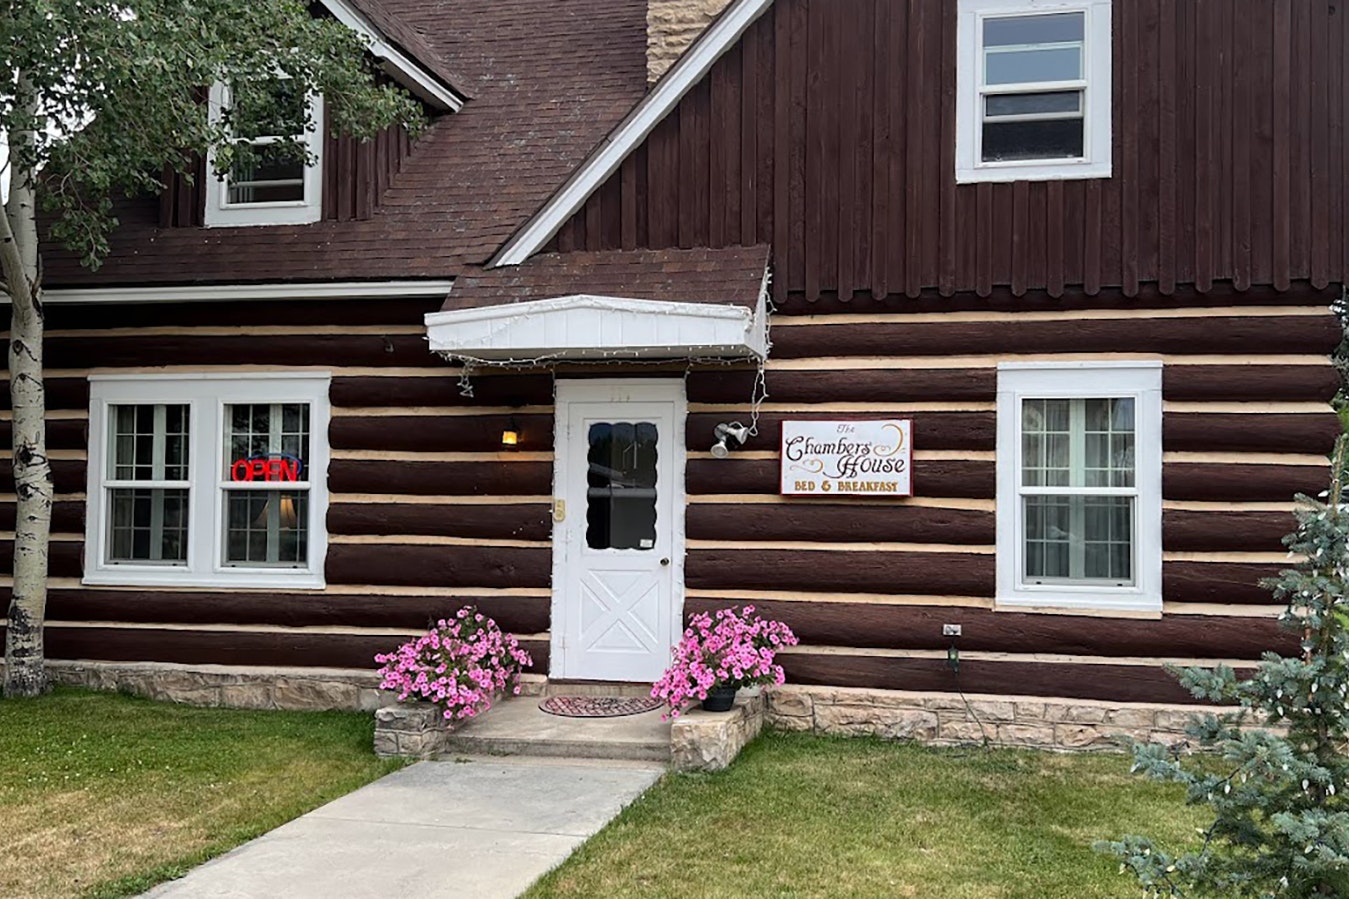 The Chambers House Bed and Breakfast is the oldest building in Pinedale, Wyoming.